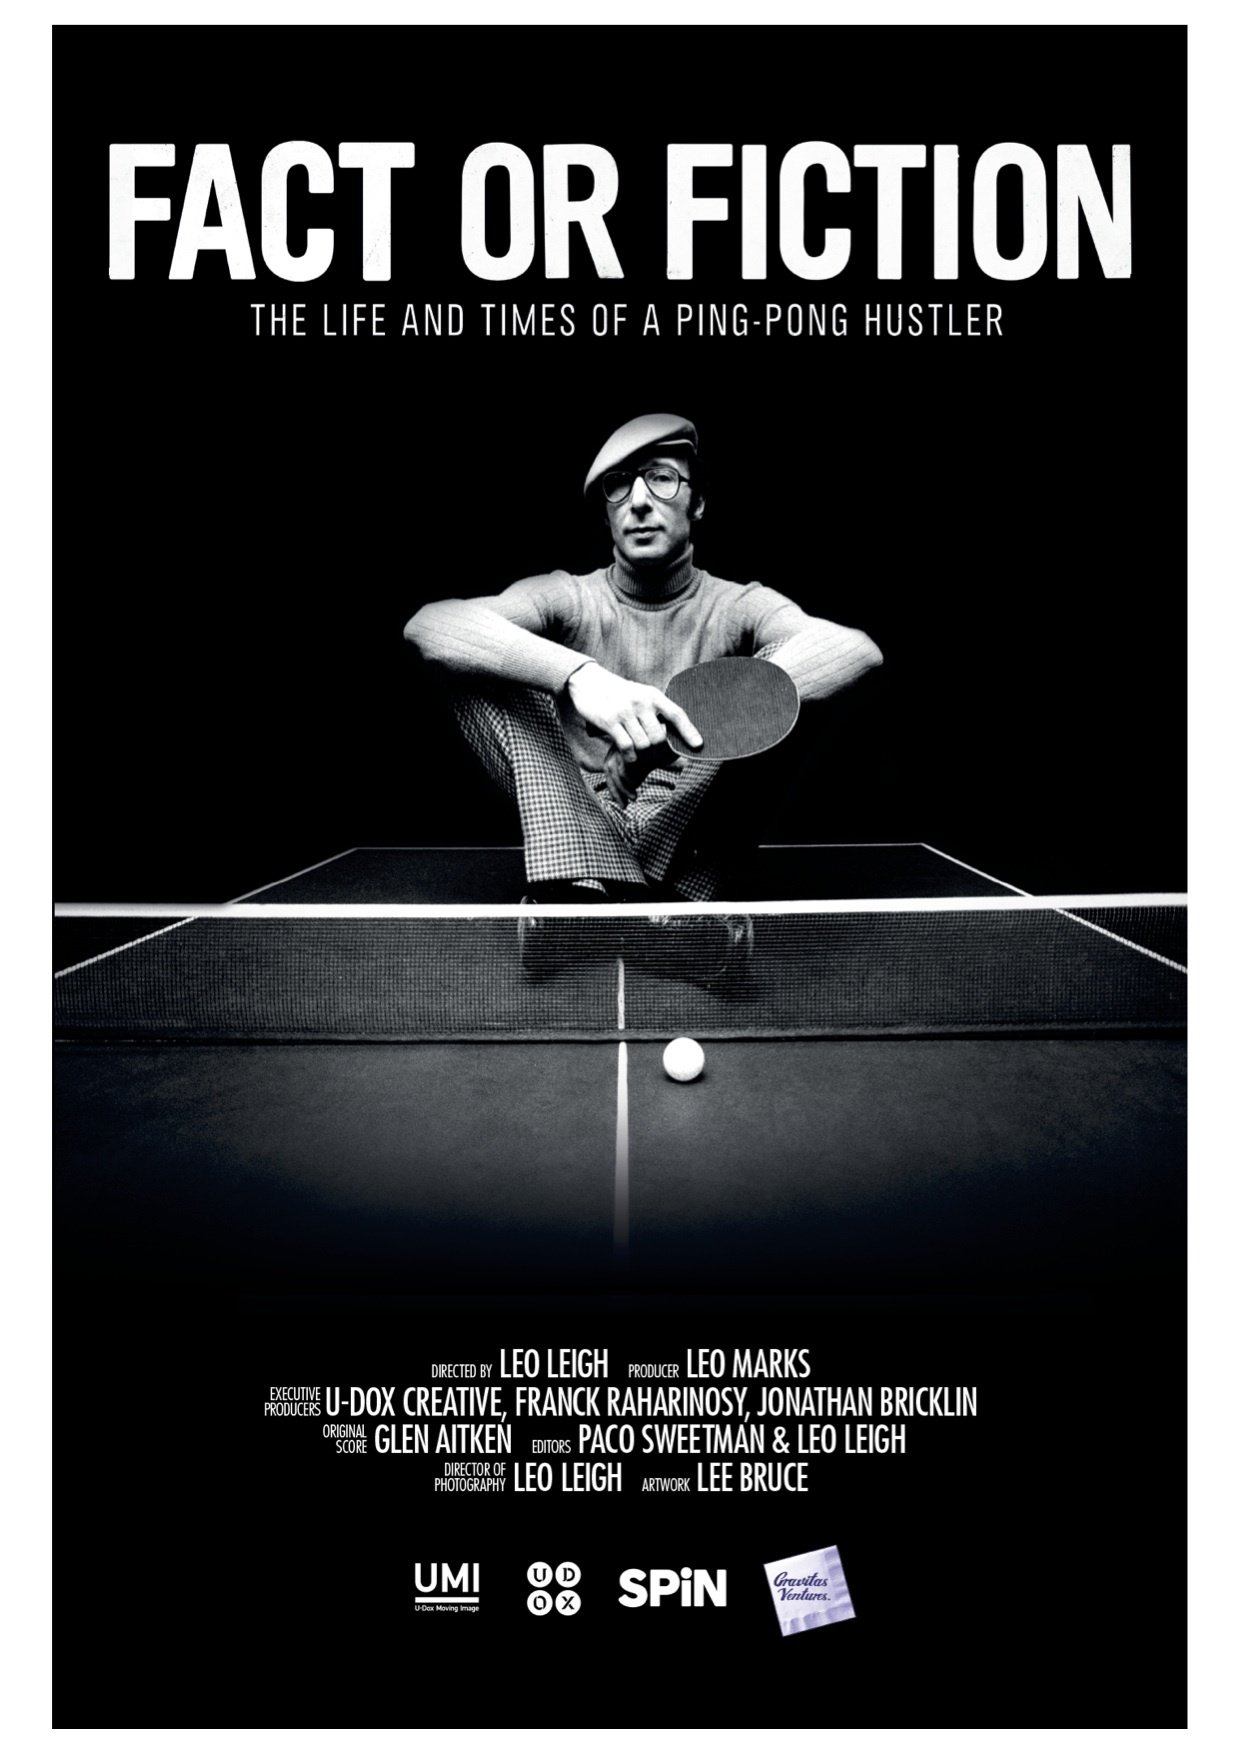 Fact or Fiction: The Life and Times of a Ping Pong Hustler (2014) Screenshot 1 